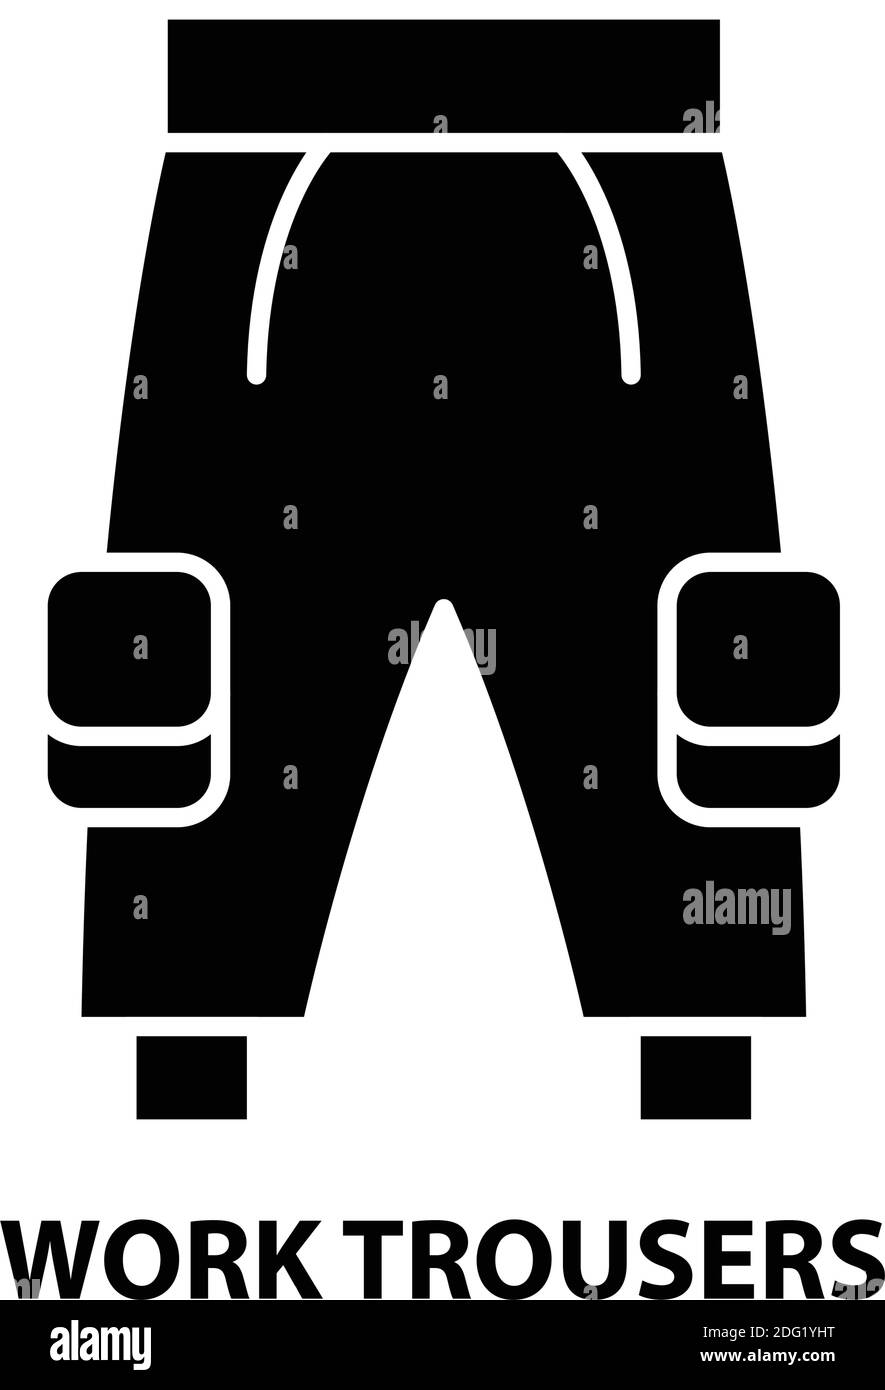 work trousers icon, black vector sign with editable strokes, concept illustration Stock Vector